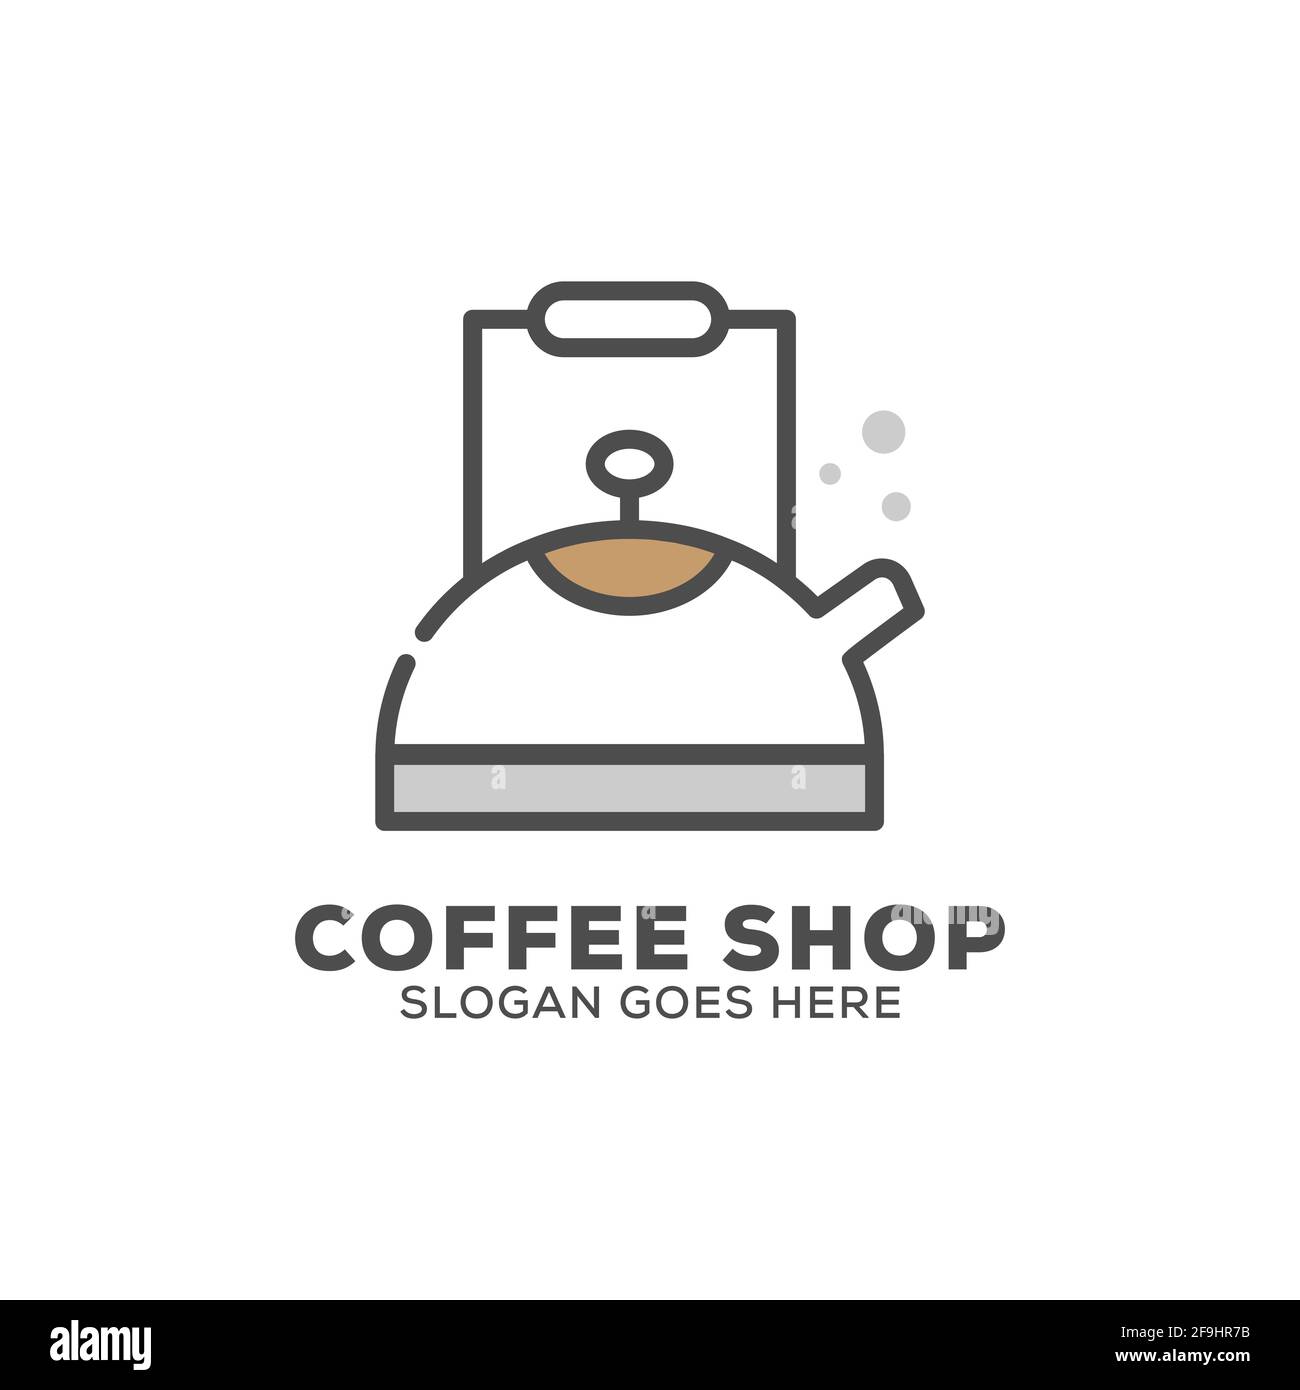 flat design kettle logo inspiration,can used Coffee shop or cafe and bar logo icon template Stock Vector